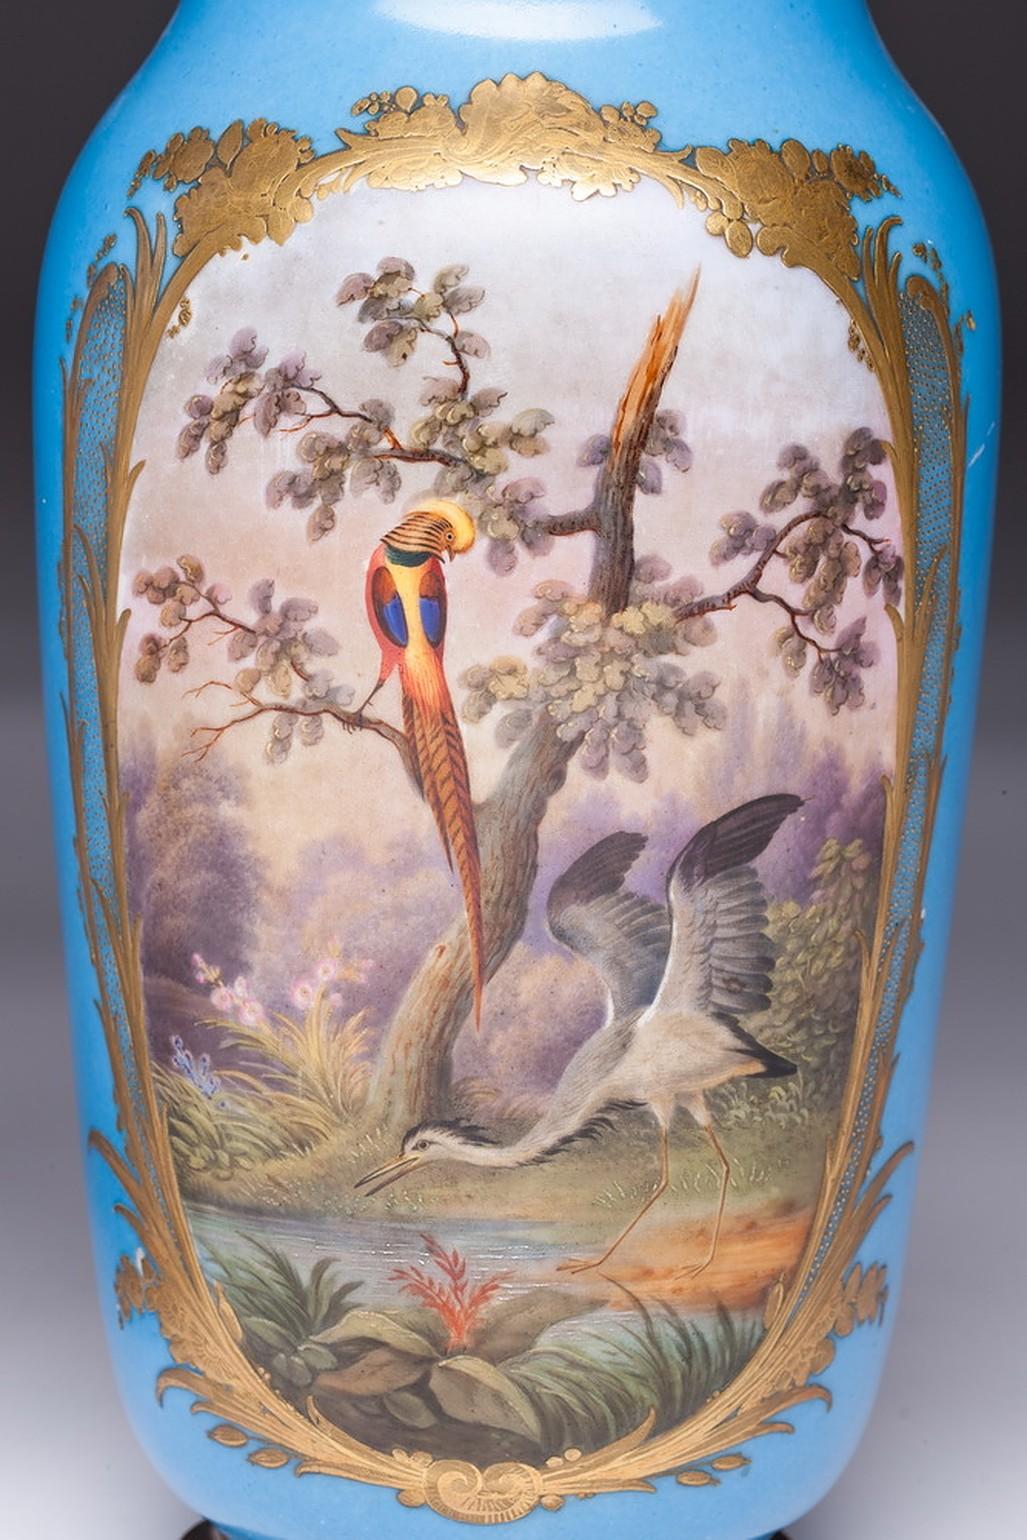 19th century light blue background vases. This color is also named Turquoise color. One side of vases is with a gold-framed cartouche with lattice decor and flower tendrils, polychrome painted landscape with tree and birds. Other side of the vases